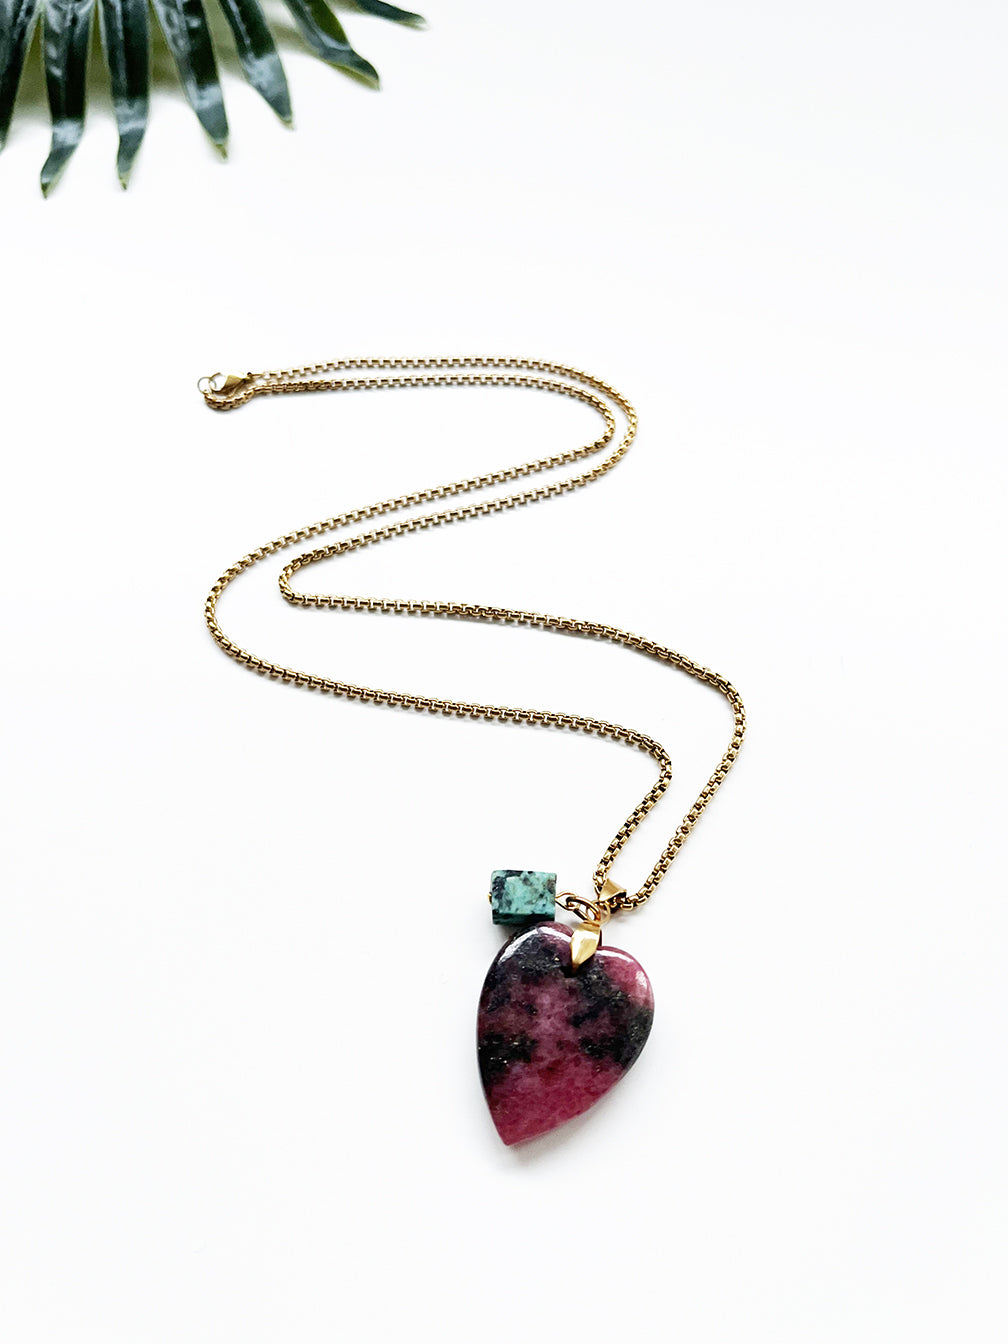 touchstone necklace - rhodonite and African turquoise